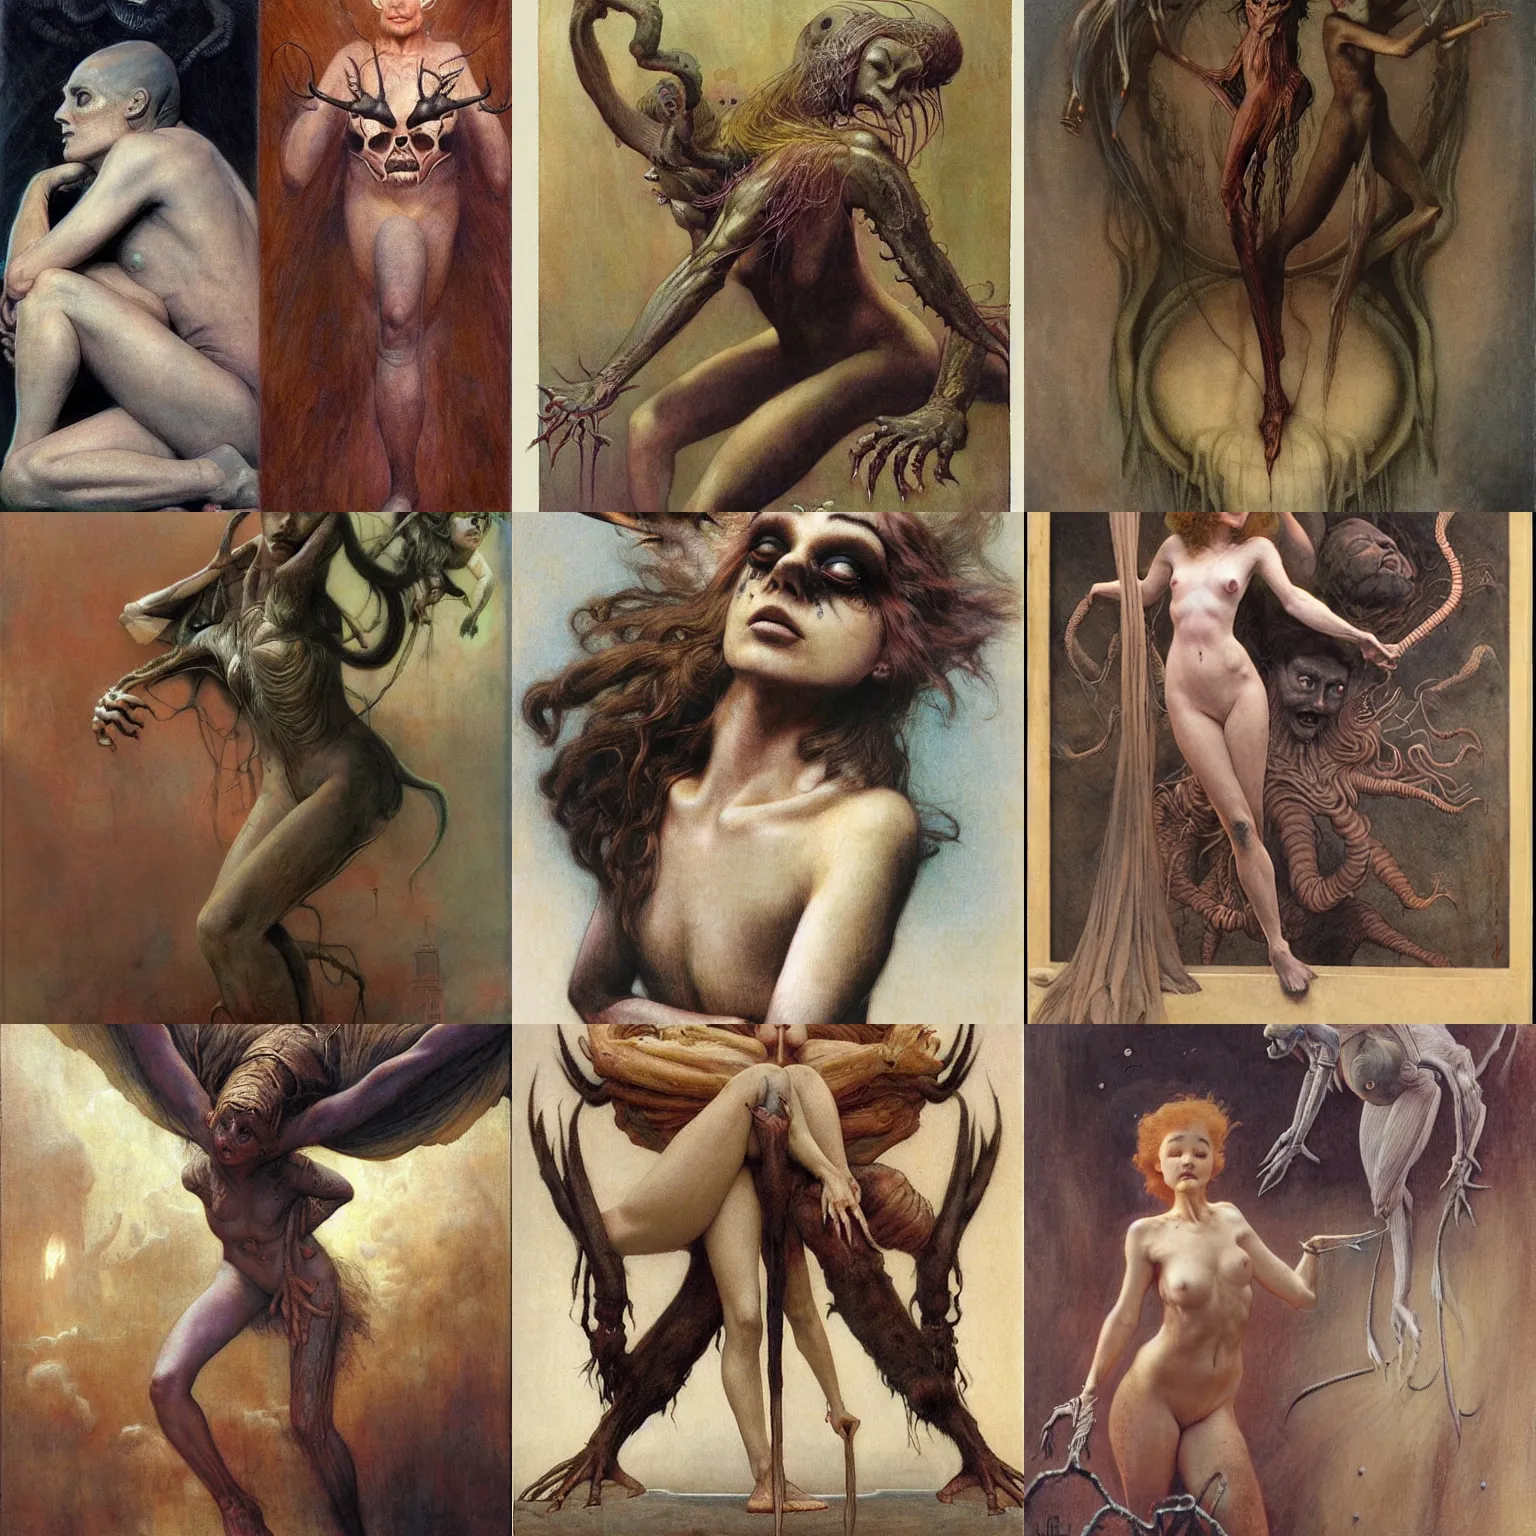 Prompt: a creature that is half human girl and half spider, by wayne barlowe, by gustav moreau, by goward, by gaston bussiere, by roberto ferri, by santiago caruso, by luis ricardo falero, by austin osman spare, by saturno butto